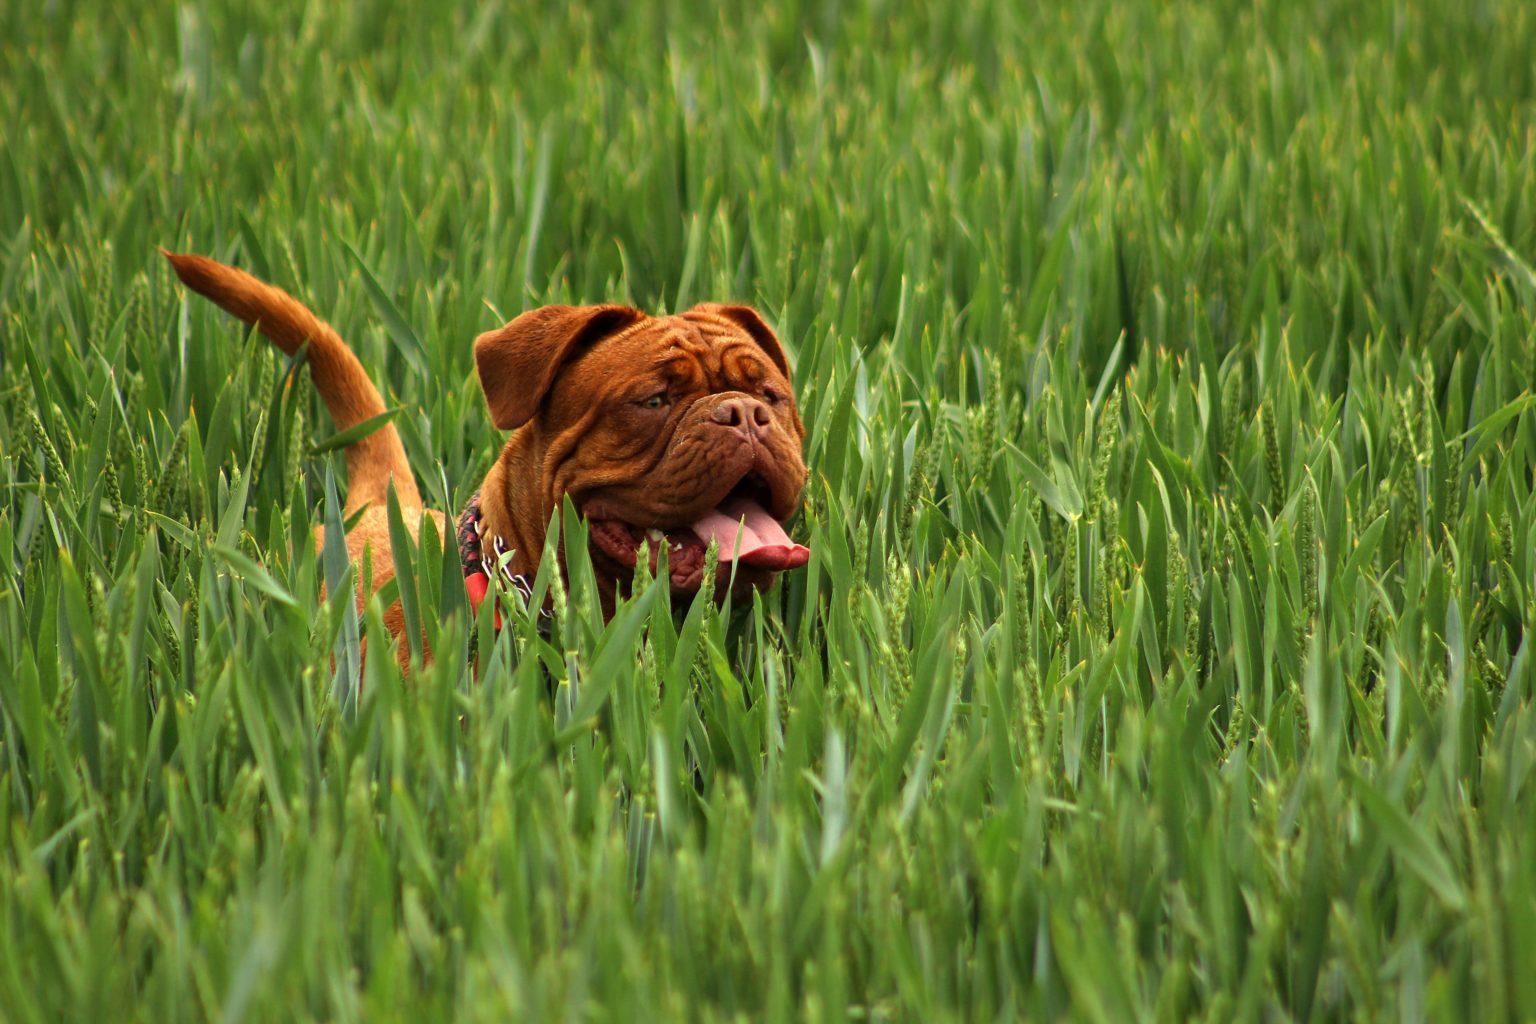 bordeauxdog playing in a field of grass